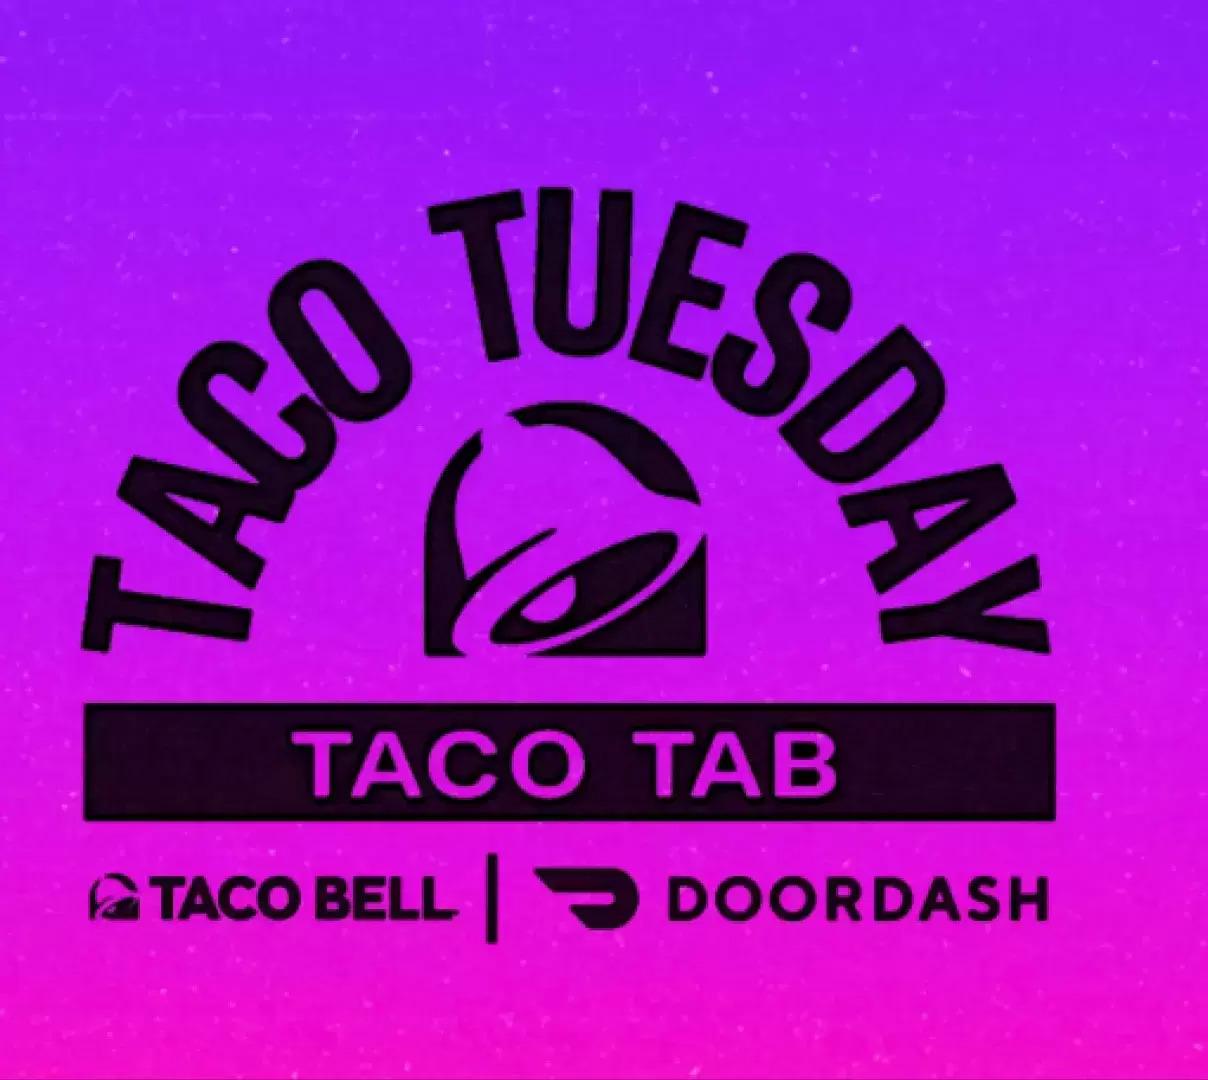 DoorDash Taco Tuesday 12 Off 15 Coupon with Code TACOFEST Deals